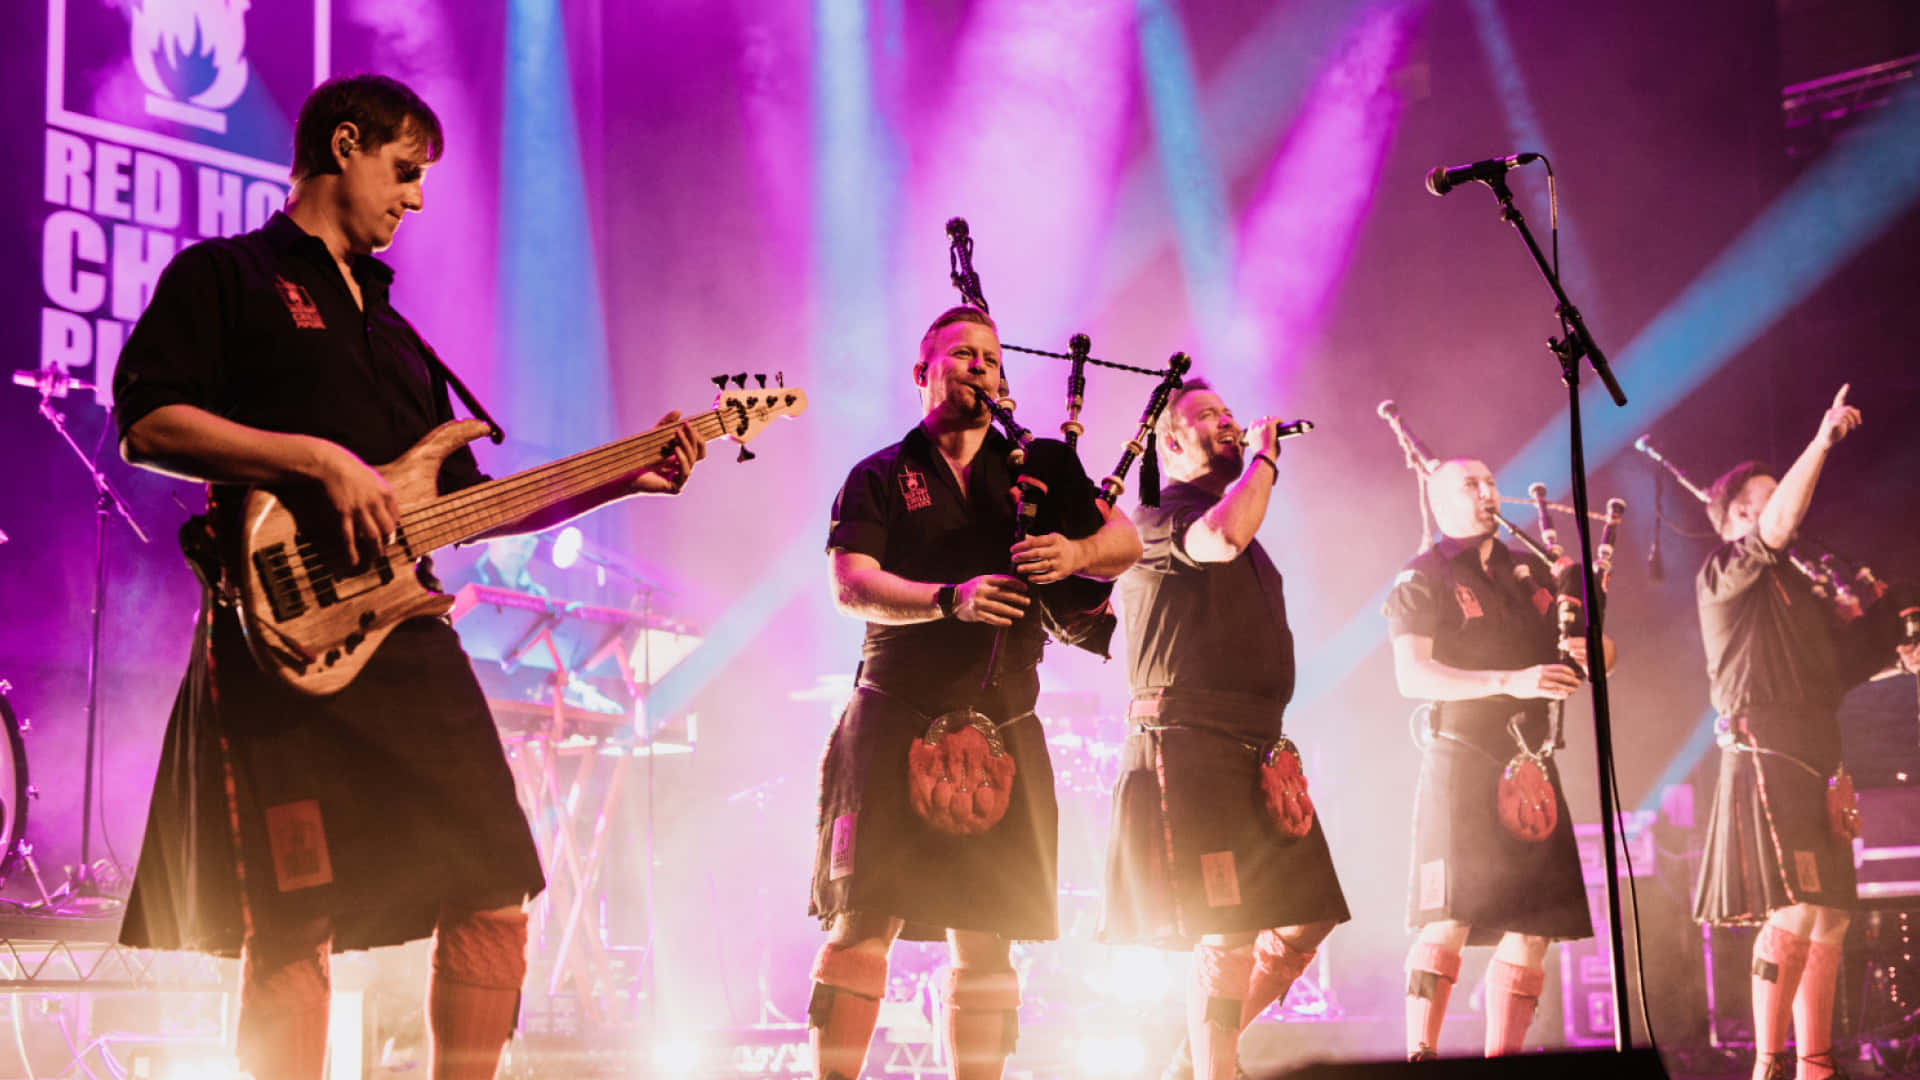 A Group Of Men In Kilts On Stage Wallpaper